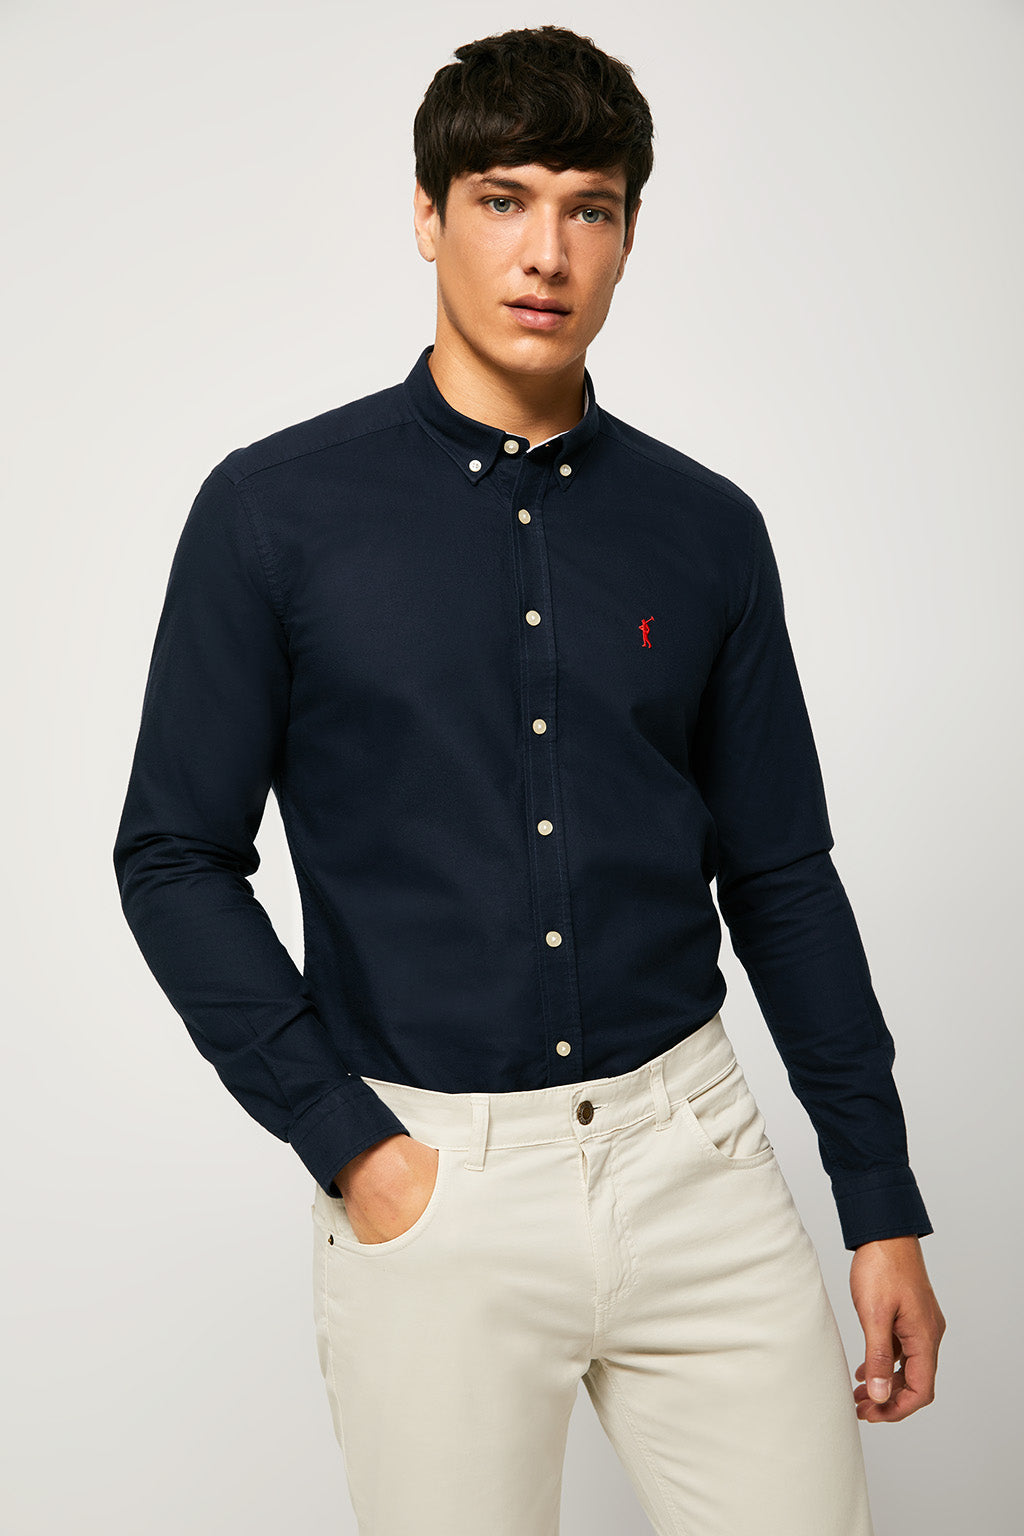 Navy-blue Oxford shirt with embroidered logo – Polo Club Europe